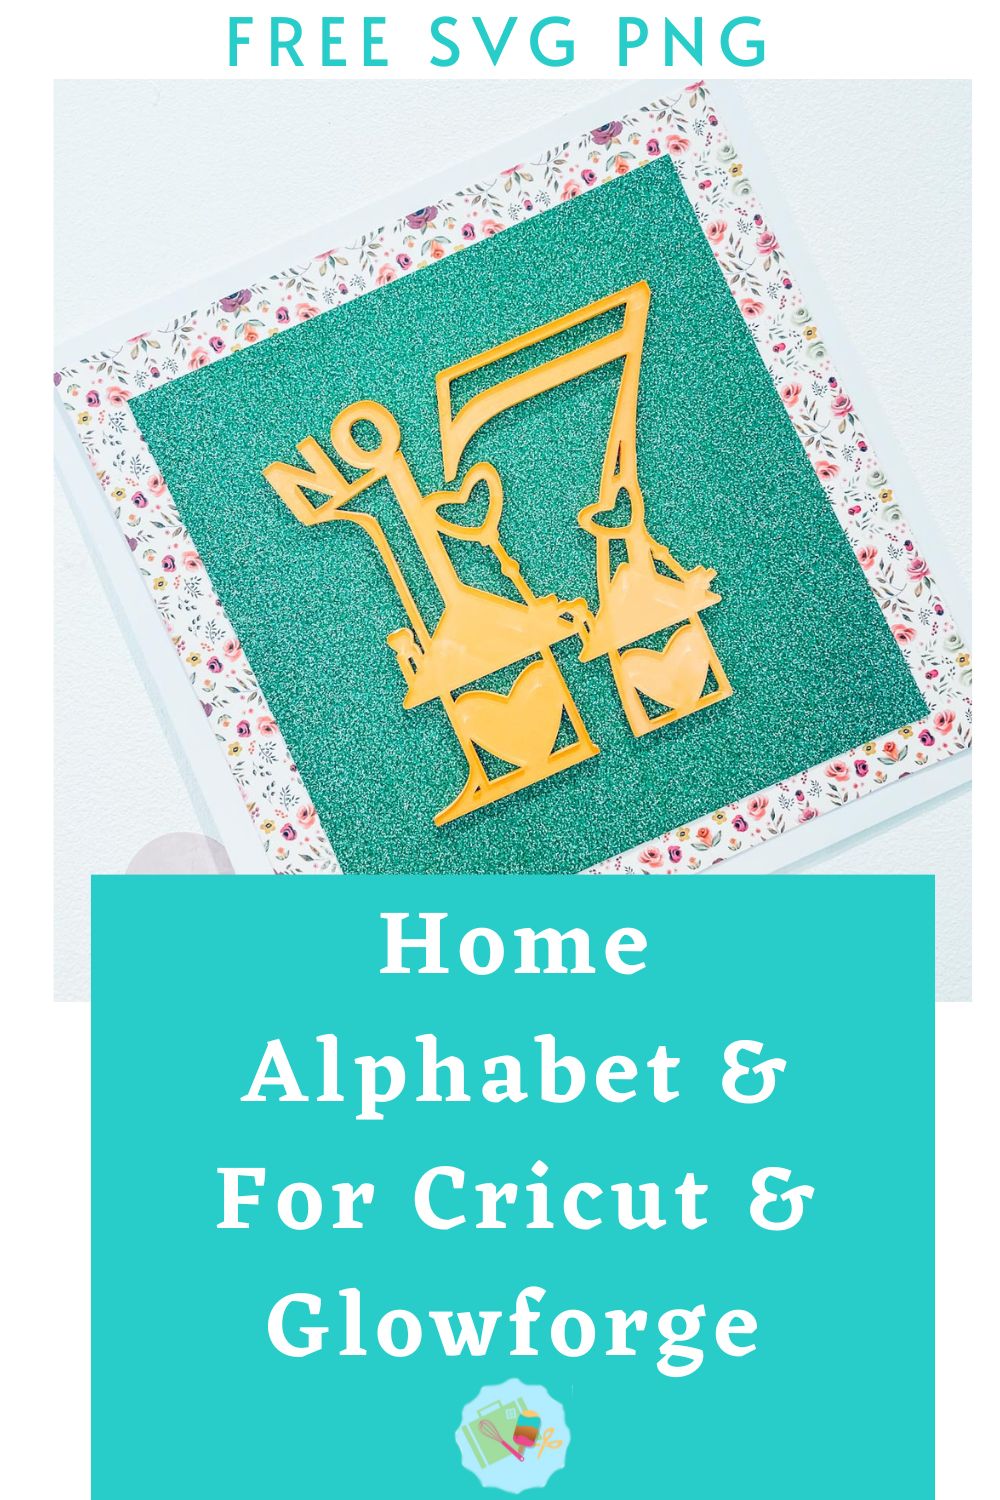 Free Home Alphabet and Numbers SVG, PNG for Cricut, Glowforge and Silhouette